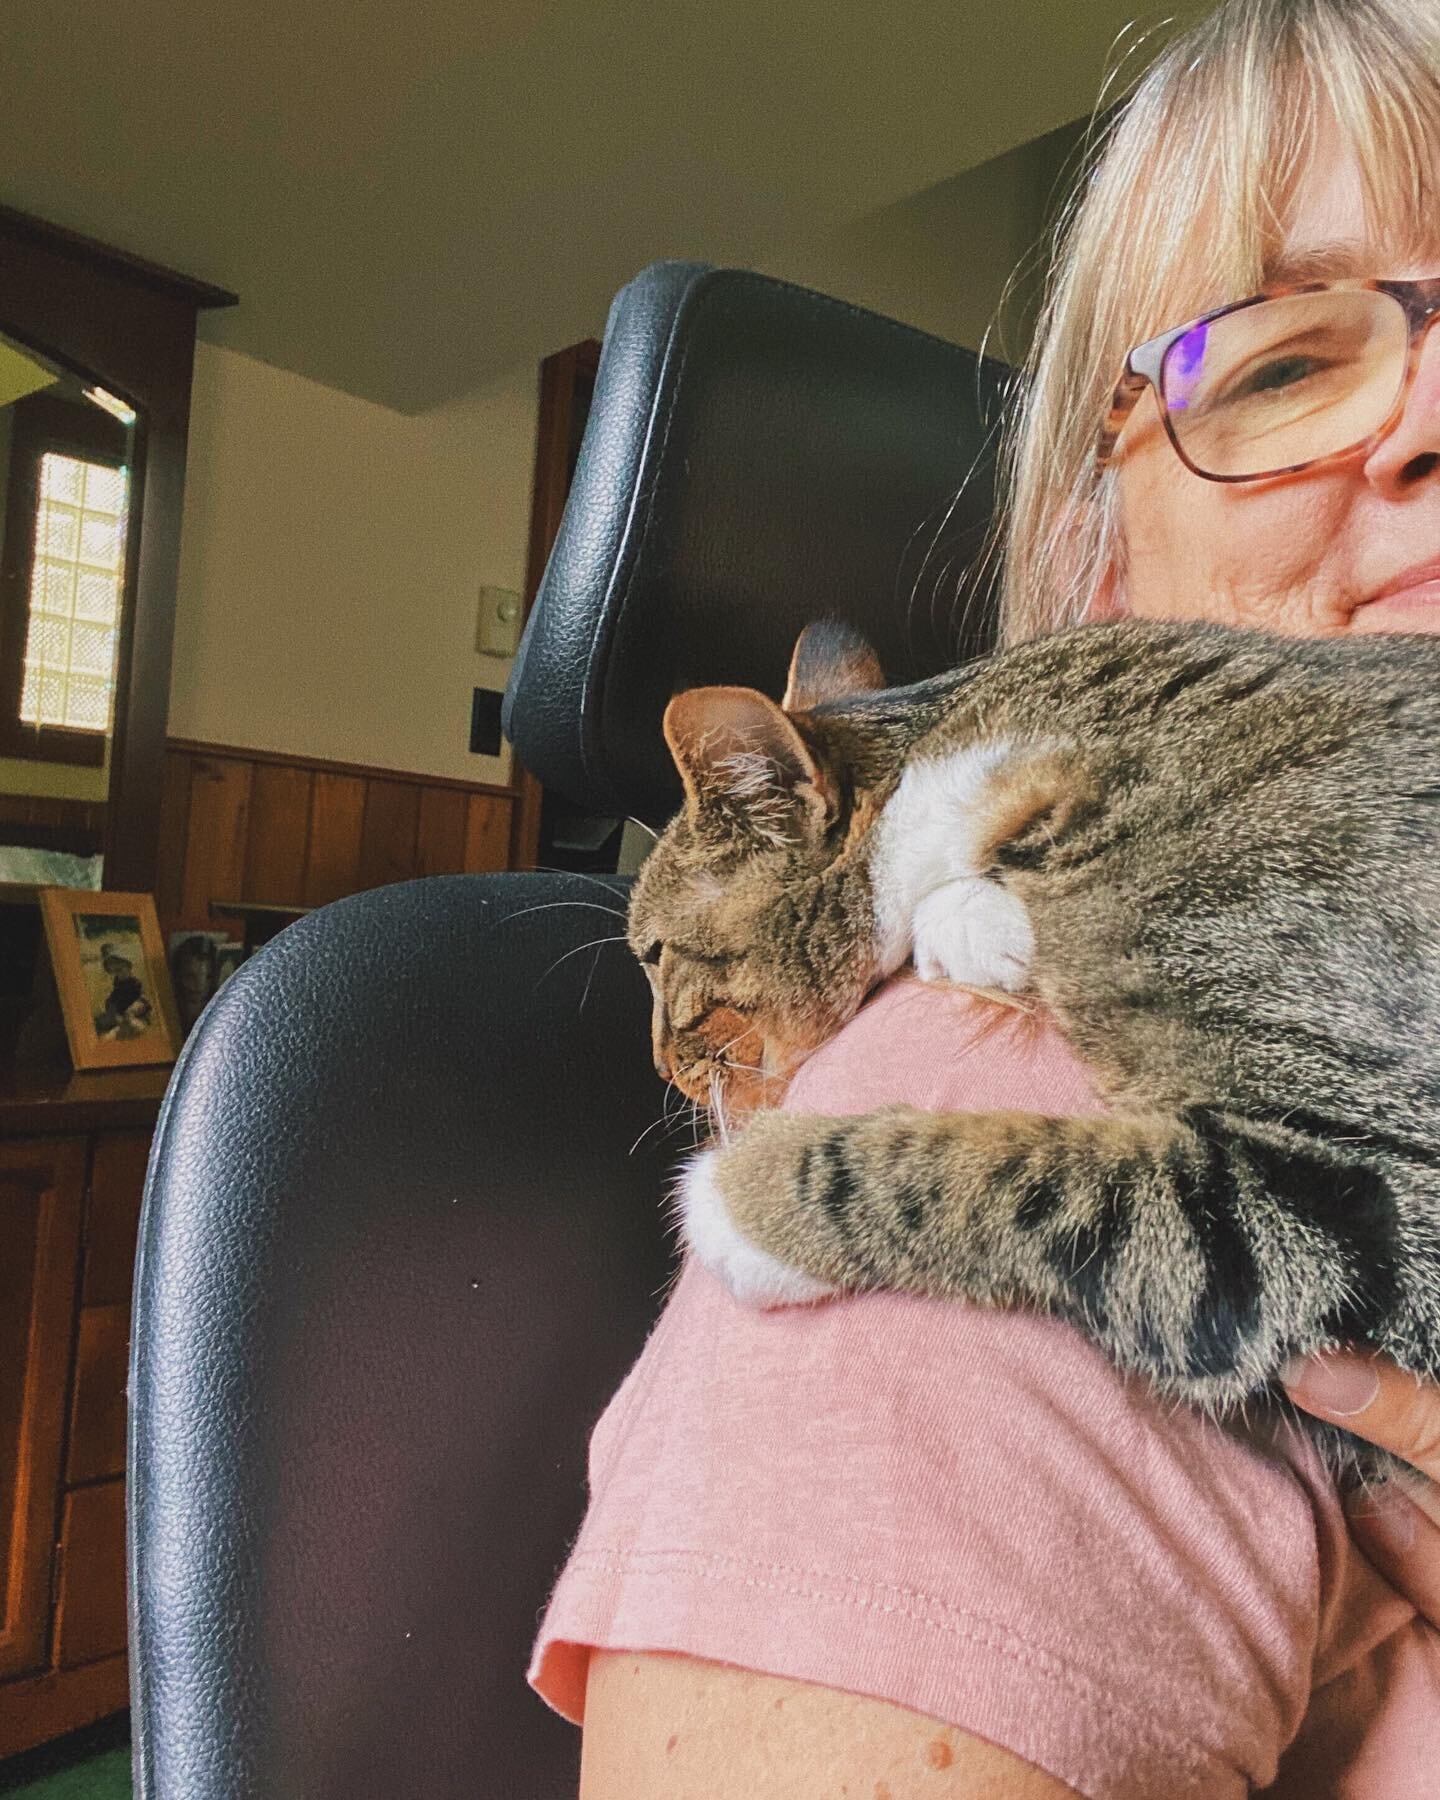 Some days the office interns get a bit too needy. Clearly we need to give them some more tasks! 😹

#officeinterns #officecat #workfromanywhere #catsofinstagram #officepet #365daymedia